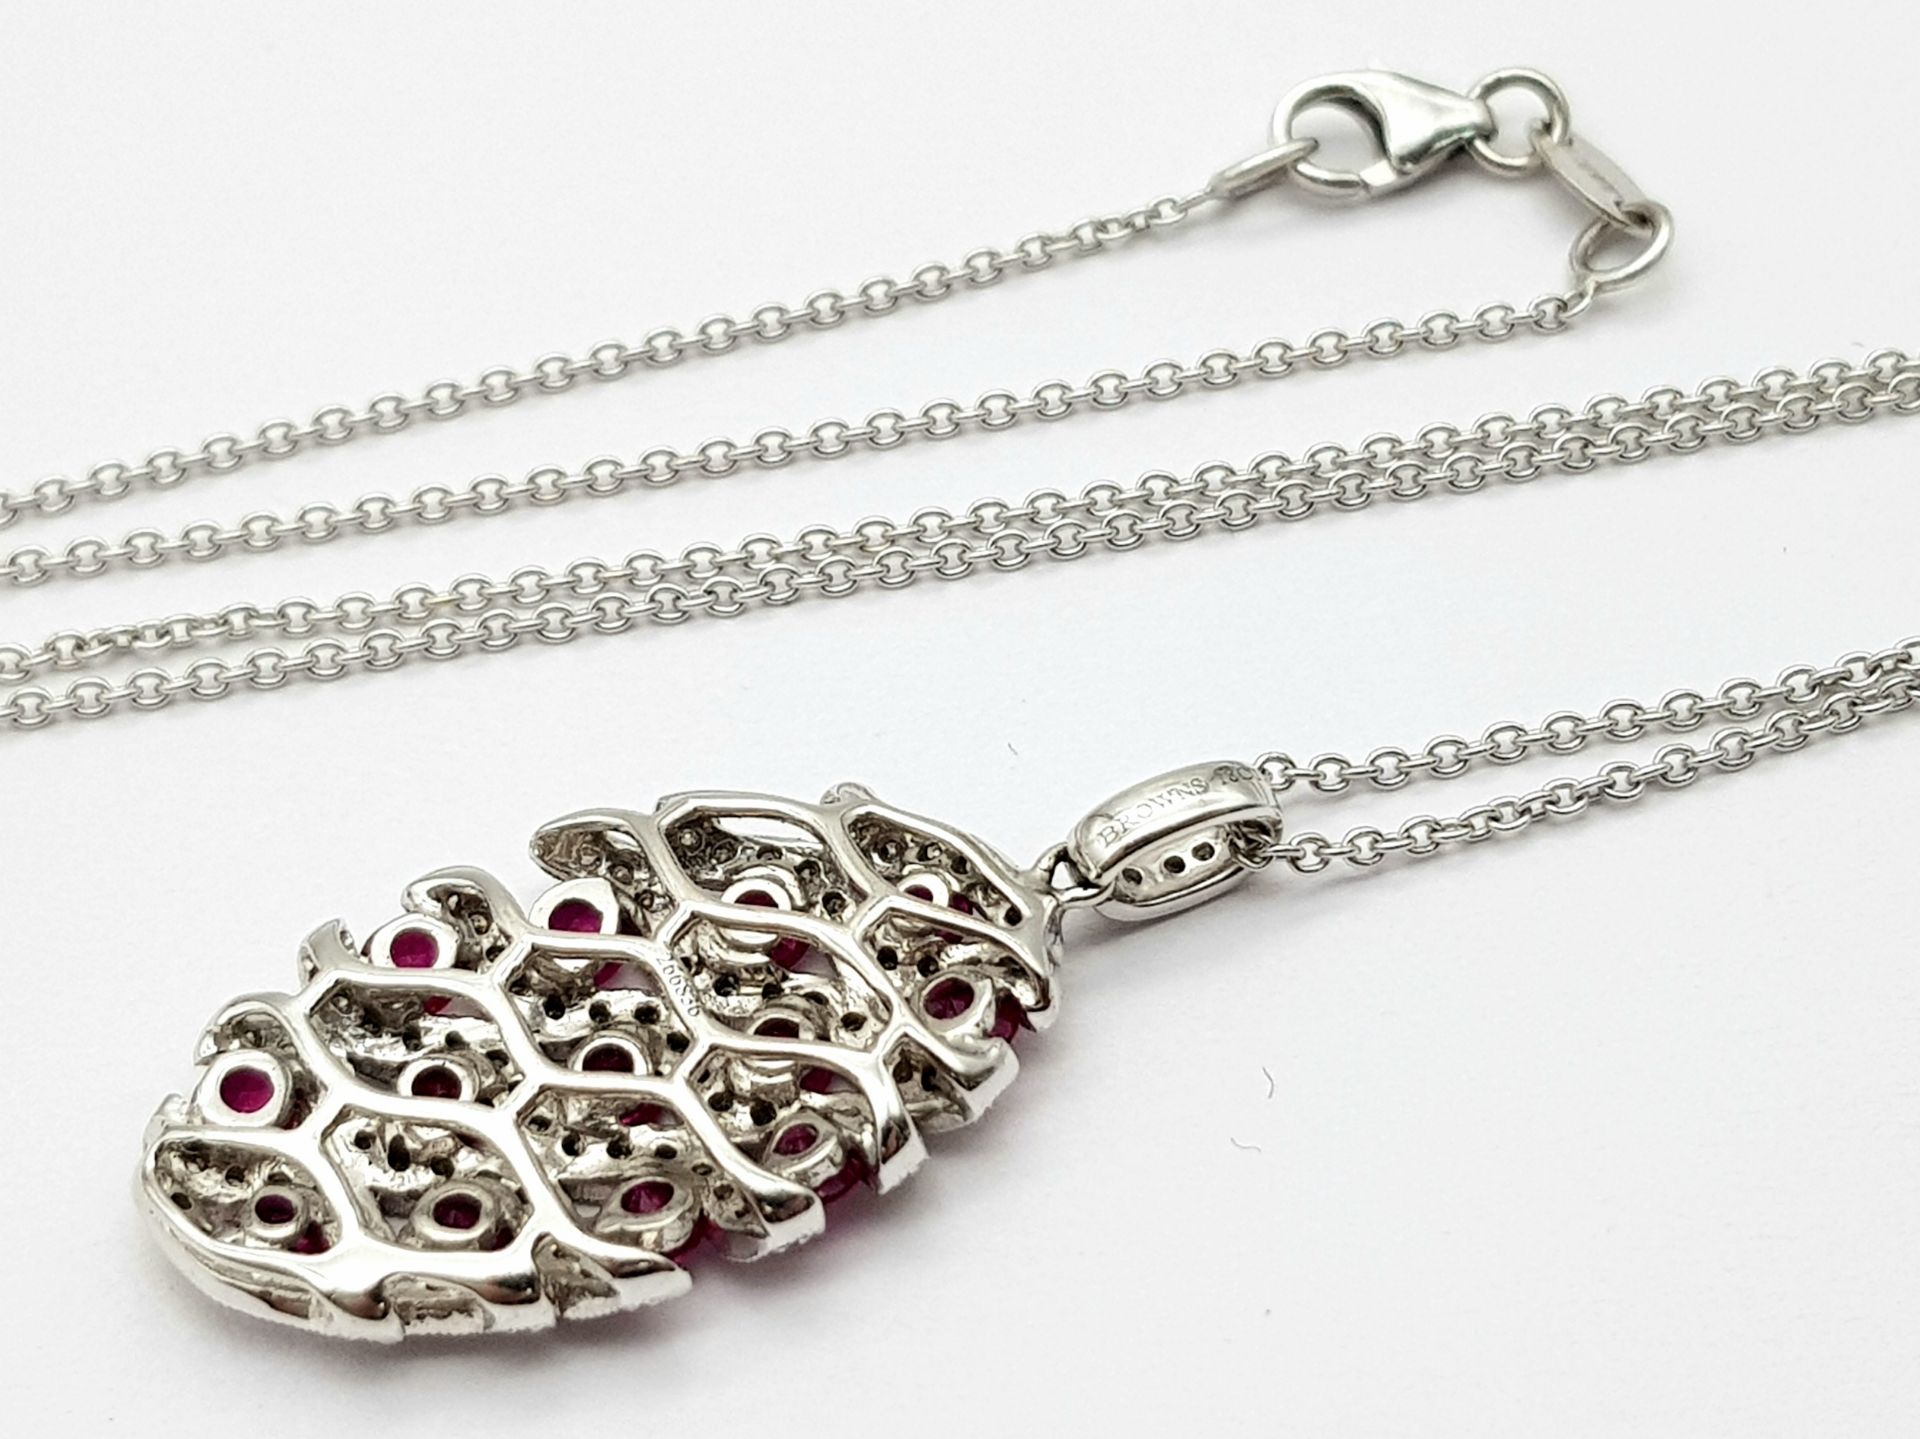 AN 18K WHITE GOLD DIAMOND AND RUBY PENDANT - 0.49CT OF DIAMONDS AND 2.29CT OF RUBIES. 6.2G WEIGHT. - Image 10 of 16